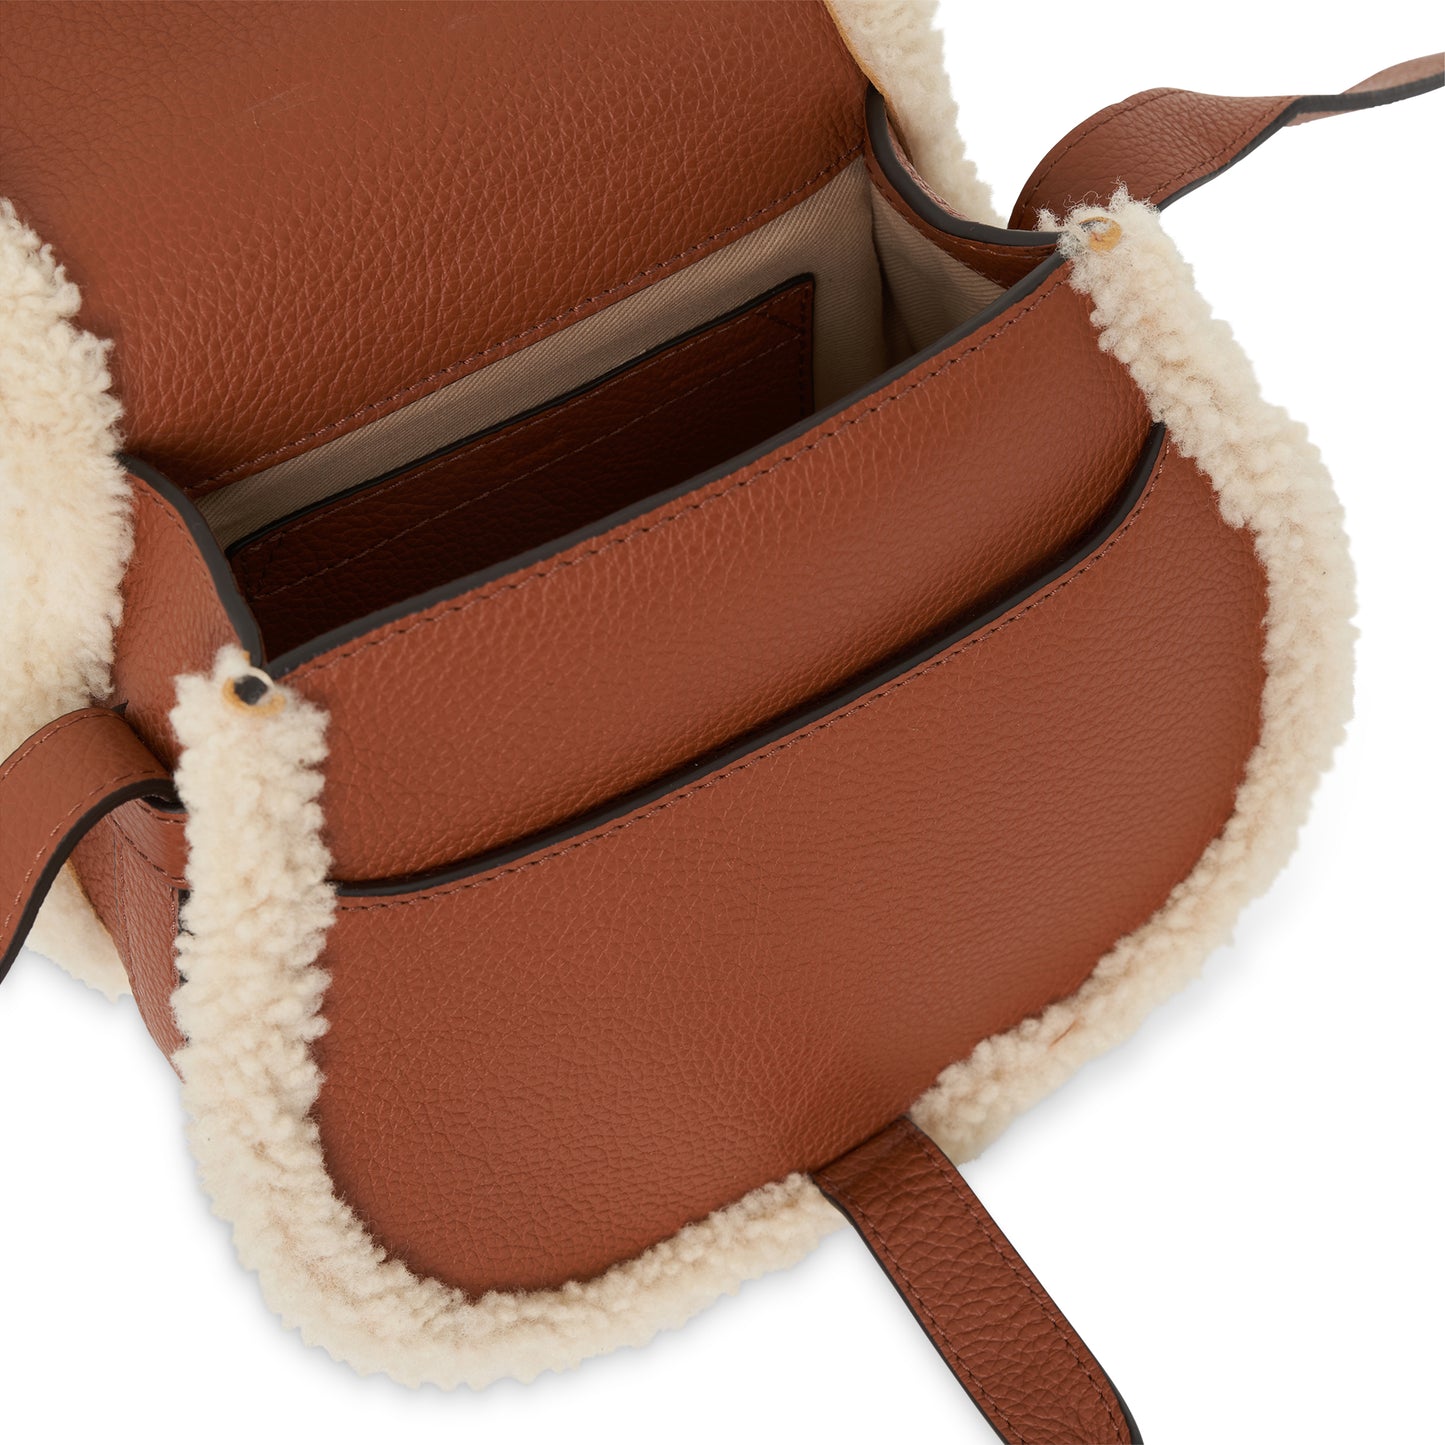 Marcie Saddle Mini Bag in Grained Calfskin and Shearling in Tan